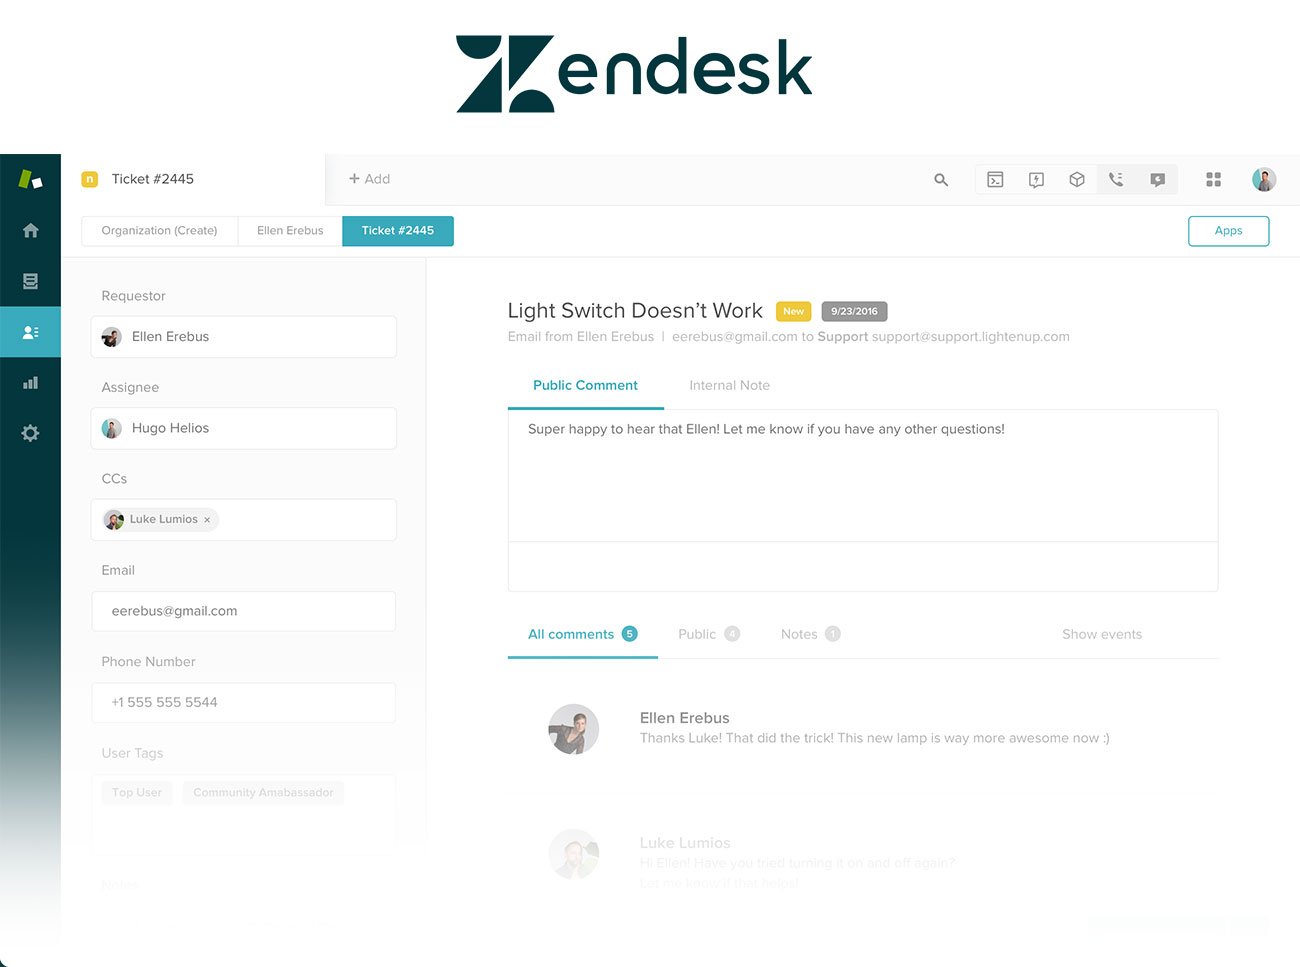 Zoho Desk vs. Zendesk: Zendesk is a service-first CRM oriented to improving customer relationships. It offers a flexible platform that grows with your business and provides omnichannel support, ticketing, and automation.